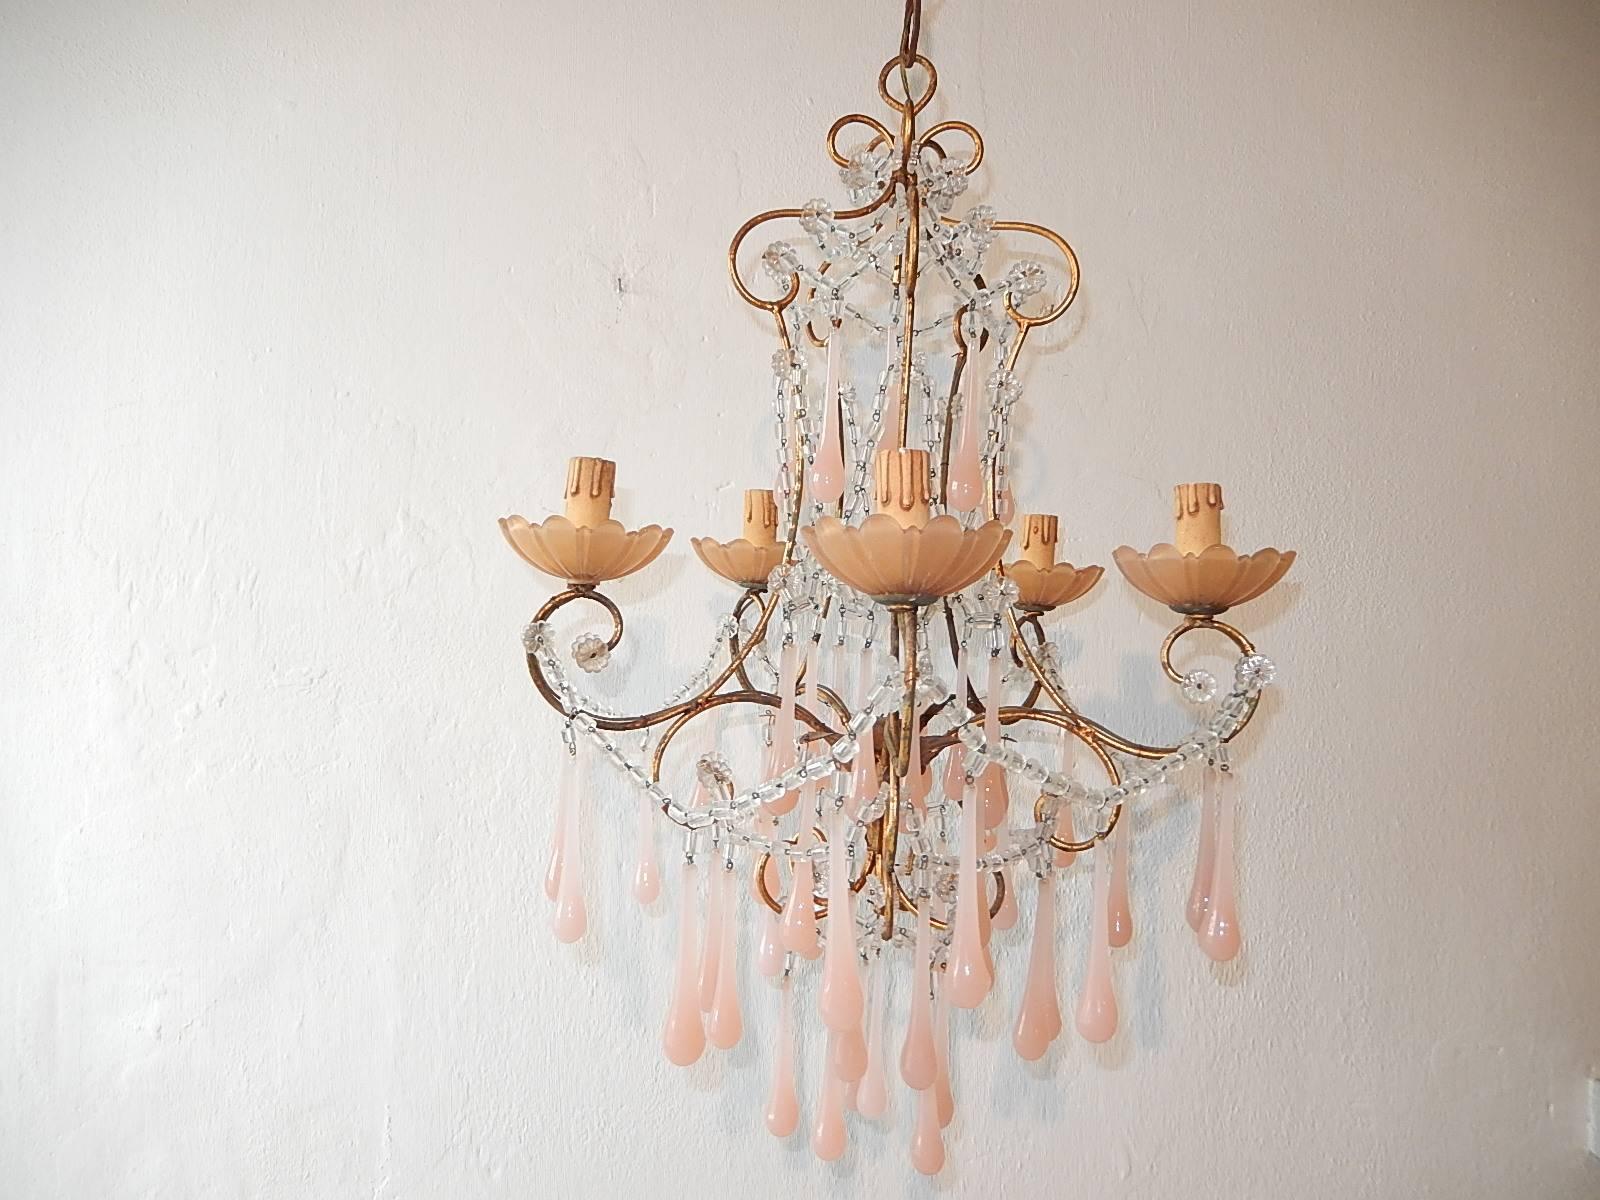 Housing five-light sitting in pink opaline bobeches. Will be rewired with appropriate sockets for country and ready to hang. Metal body with swags of macaroni beads. Bubble gum pink opaline drops. Opaline bobeches as well. Adding another 22